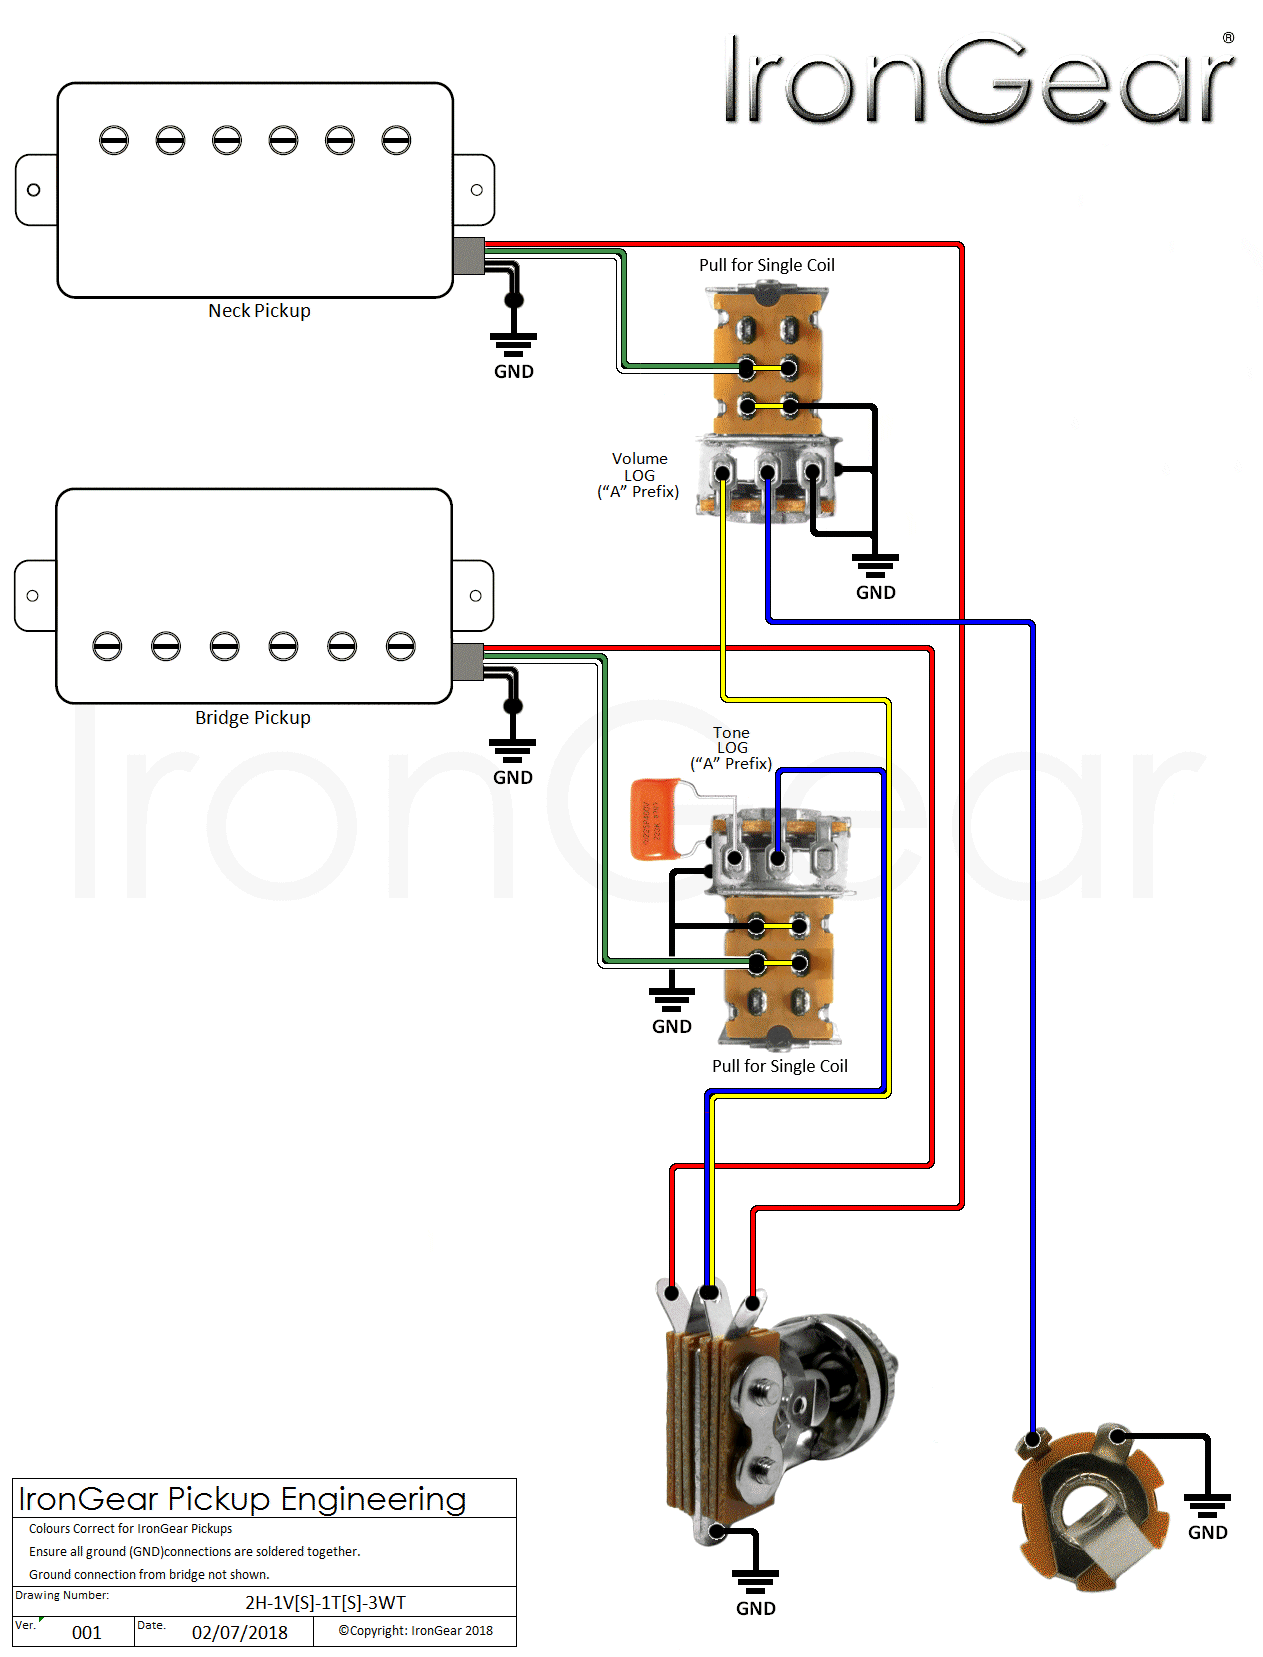 Telecaster Wiring Diagram 3 Position Switch Humbucker from www.irongear.co.uk